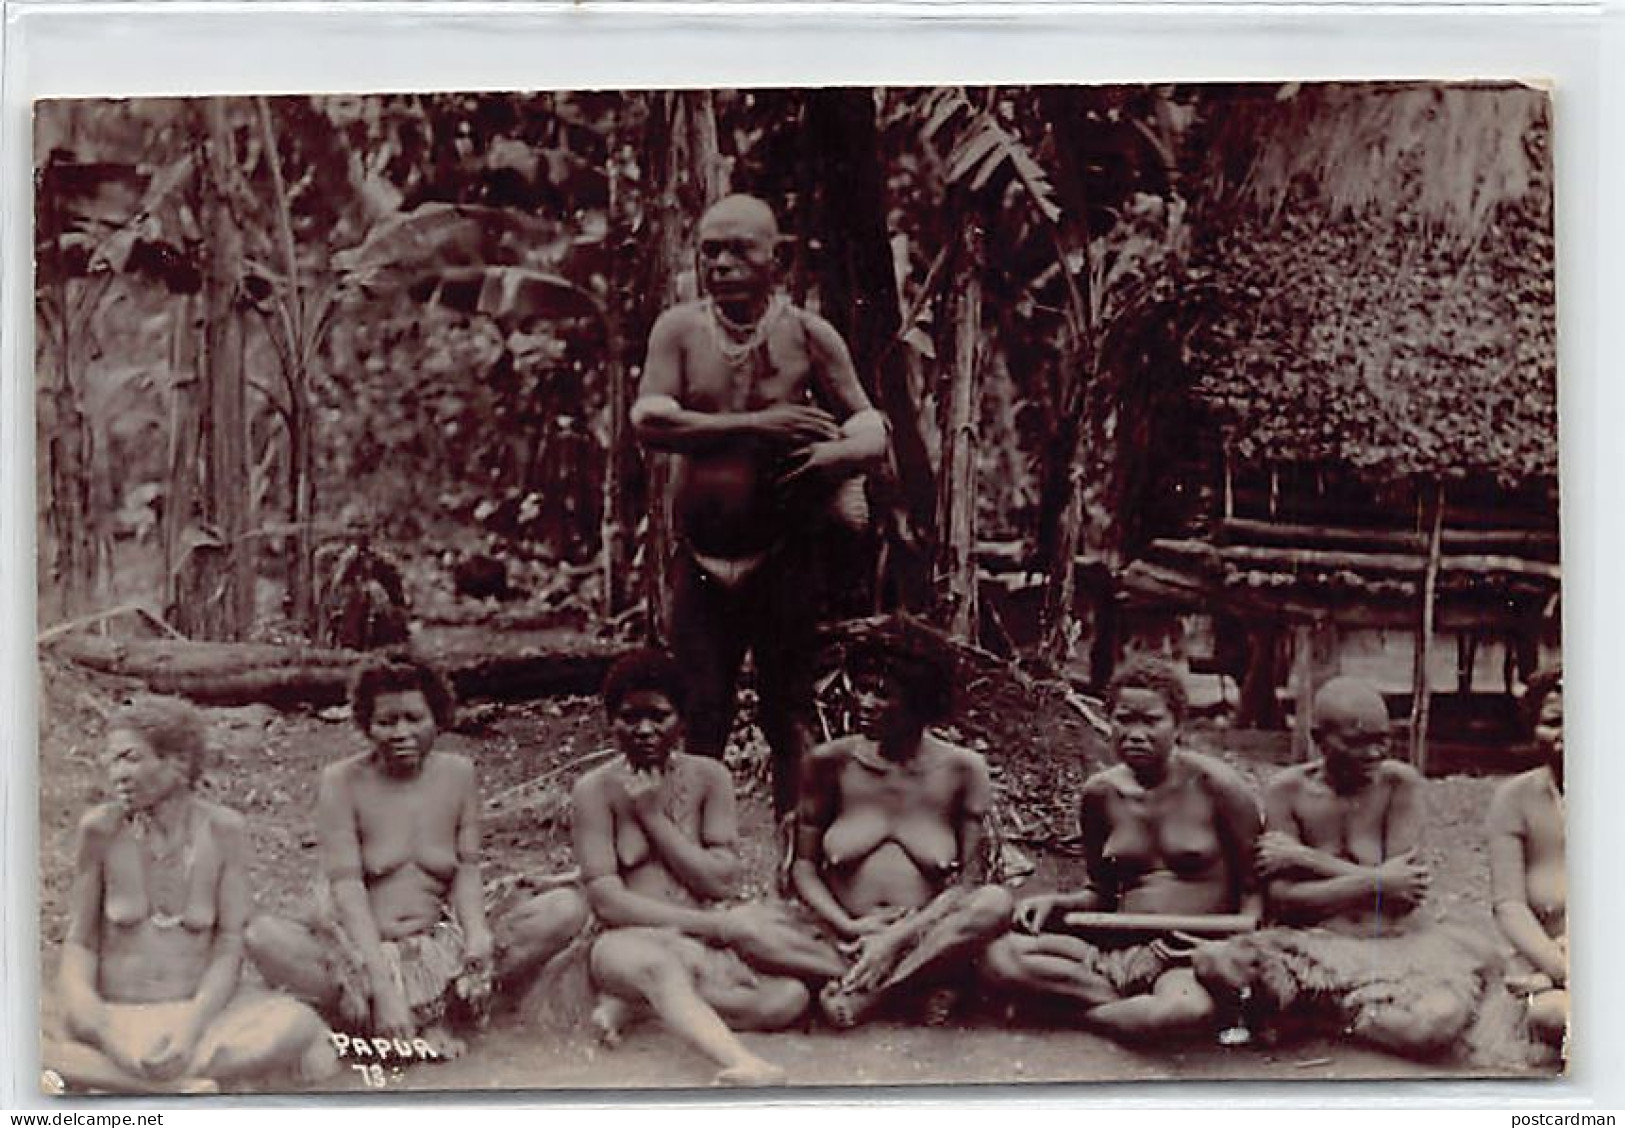 PAPUA NEW GUINEA - Papuan Chief And His Nude Wives - REAL PHOTO - Publ. W. H. Cooper. - Papoea-Nieuw-Guinea